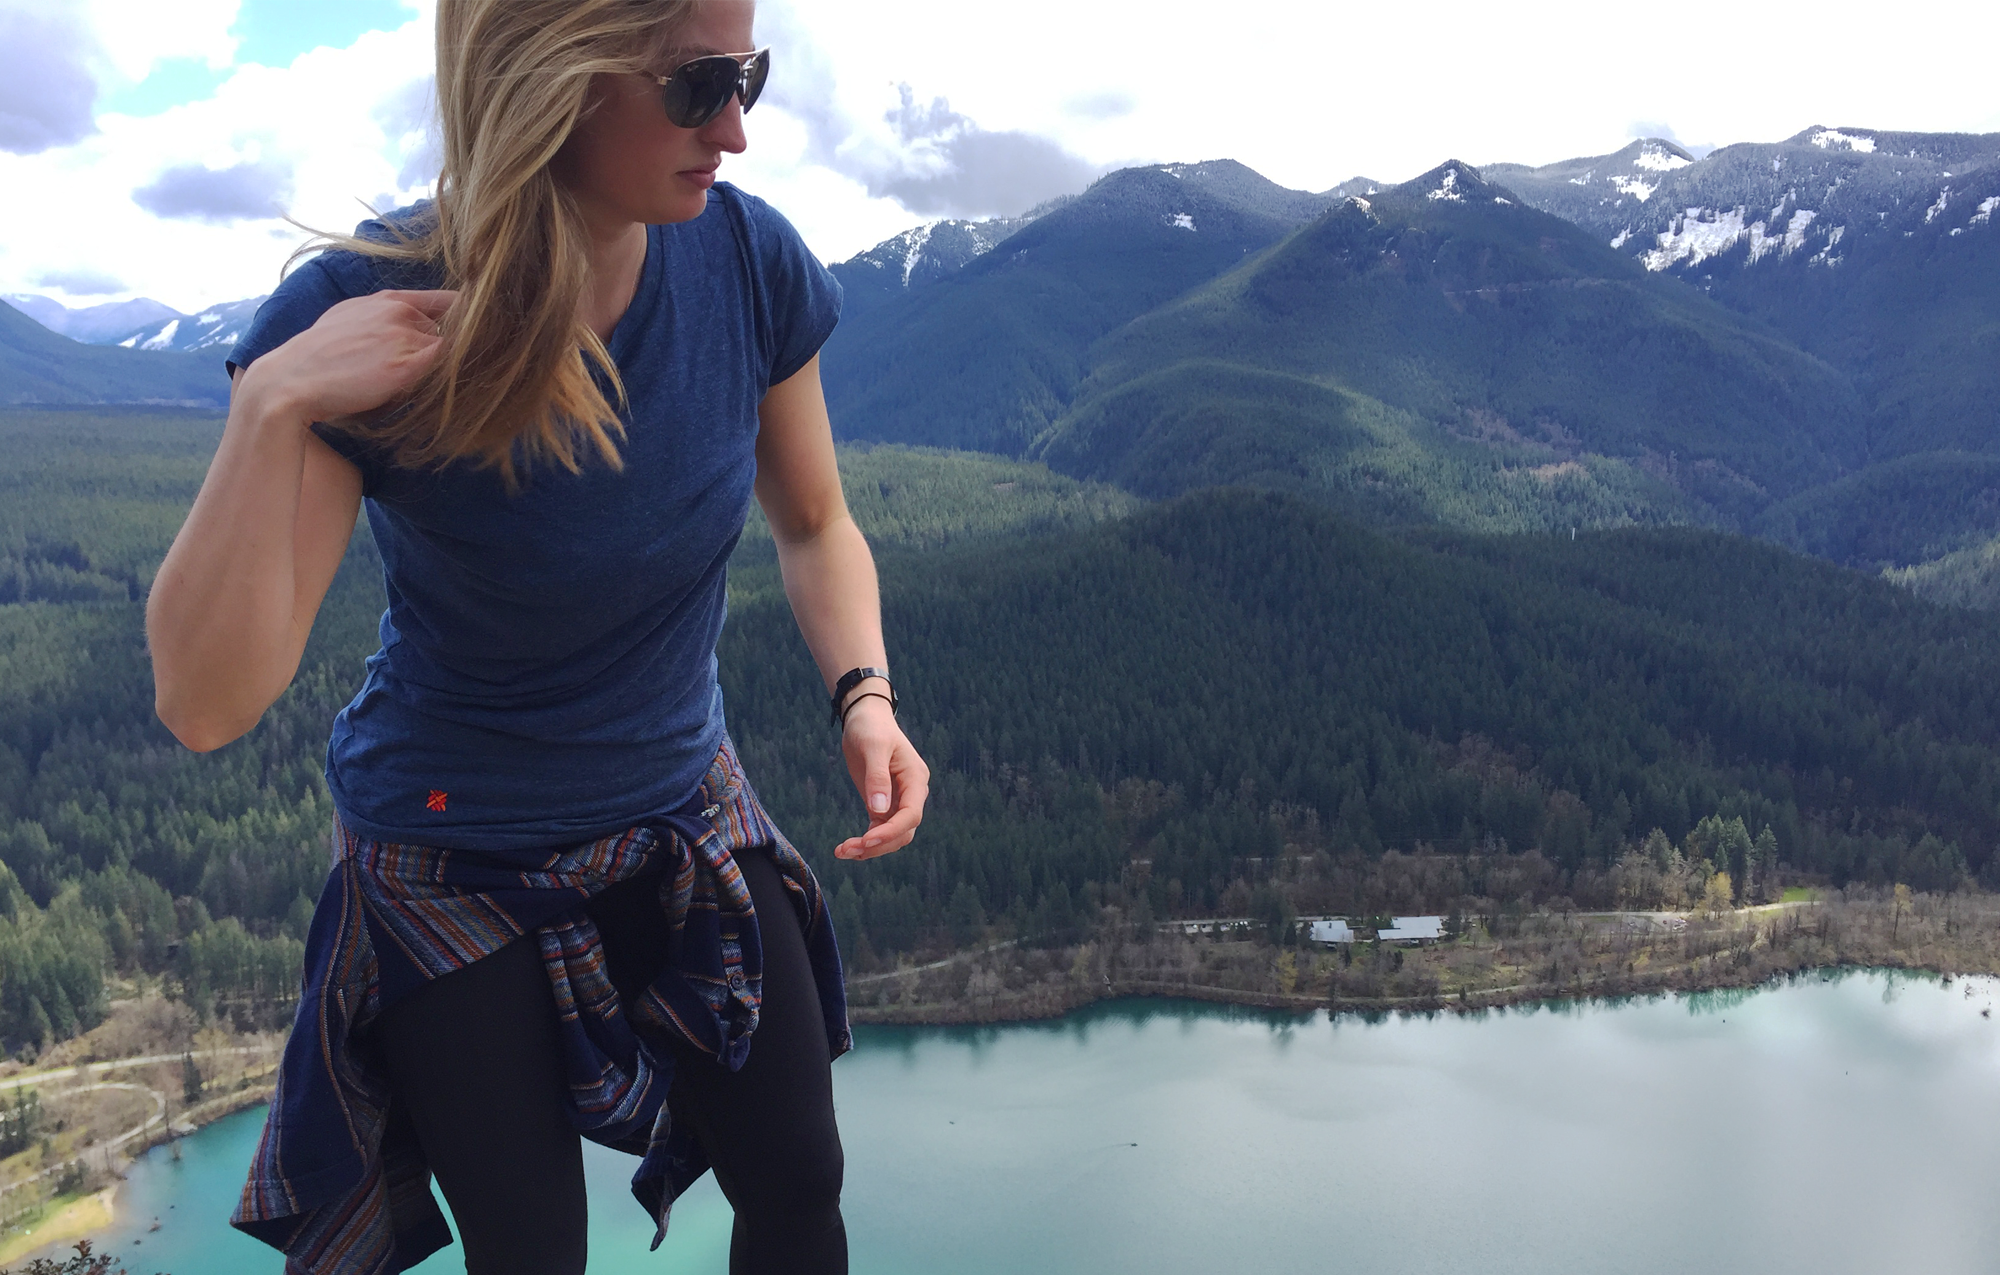 Blond woman standing on a mountain wearing The Greenest Tee on the Planet by Kusaga Athletic